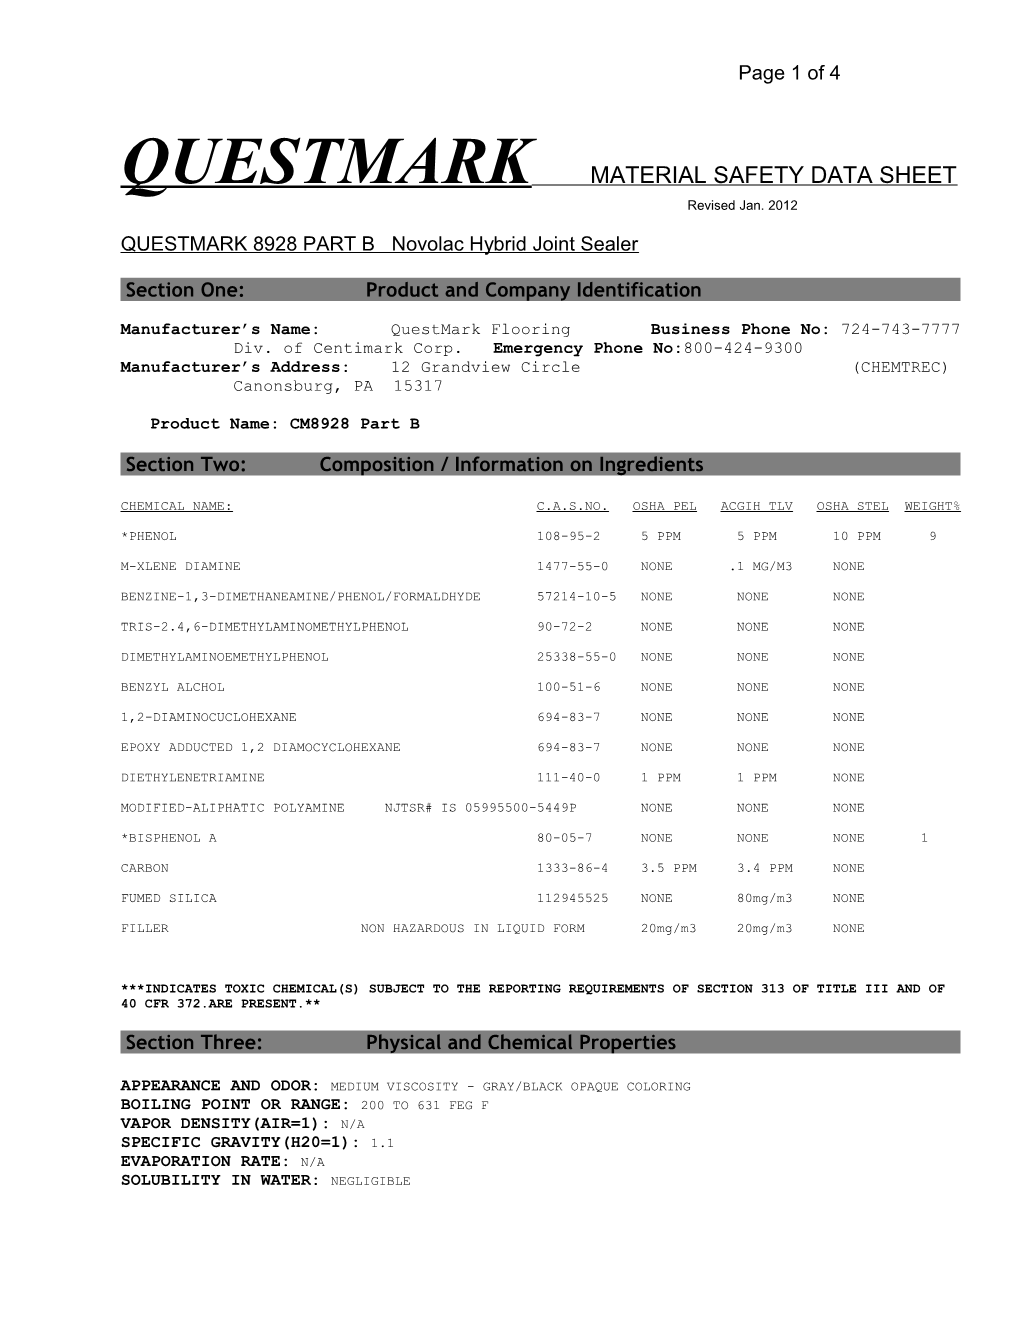 Centimark Material Safety Data Sheet